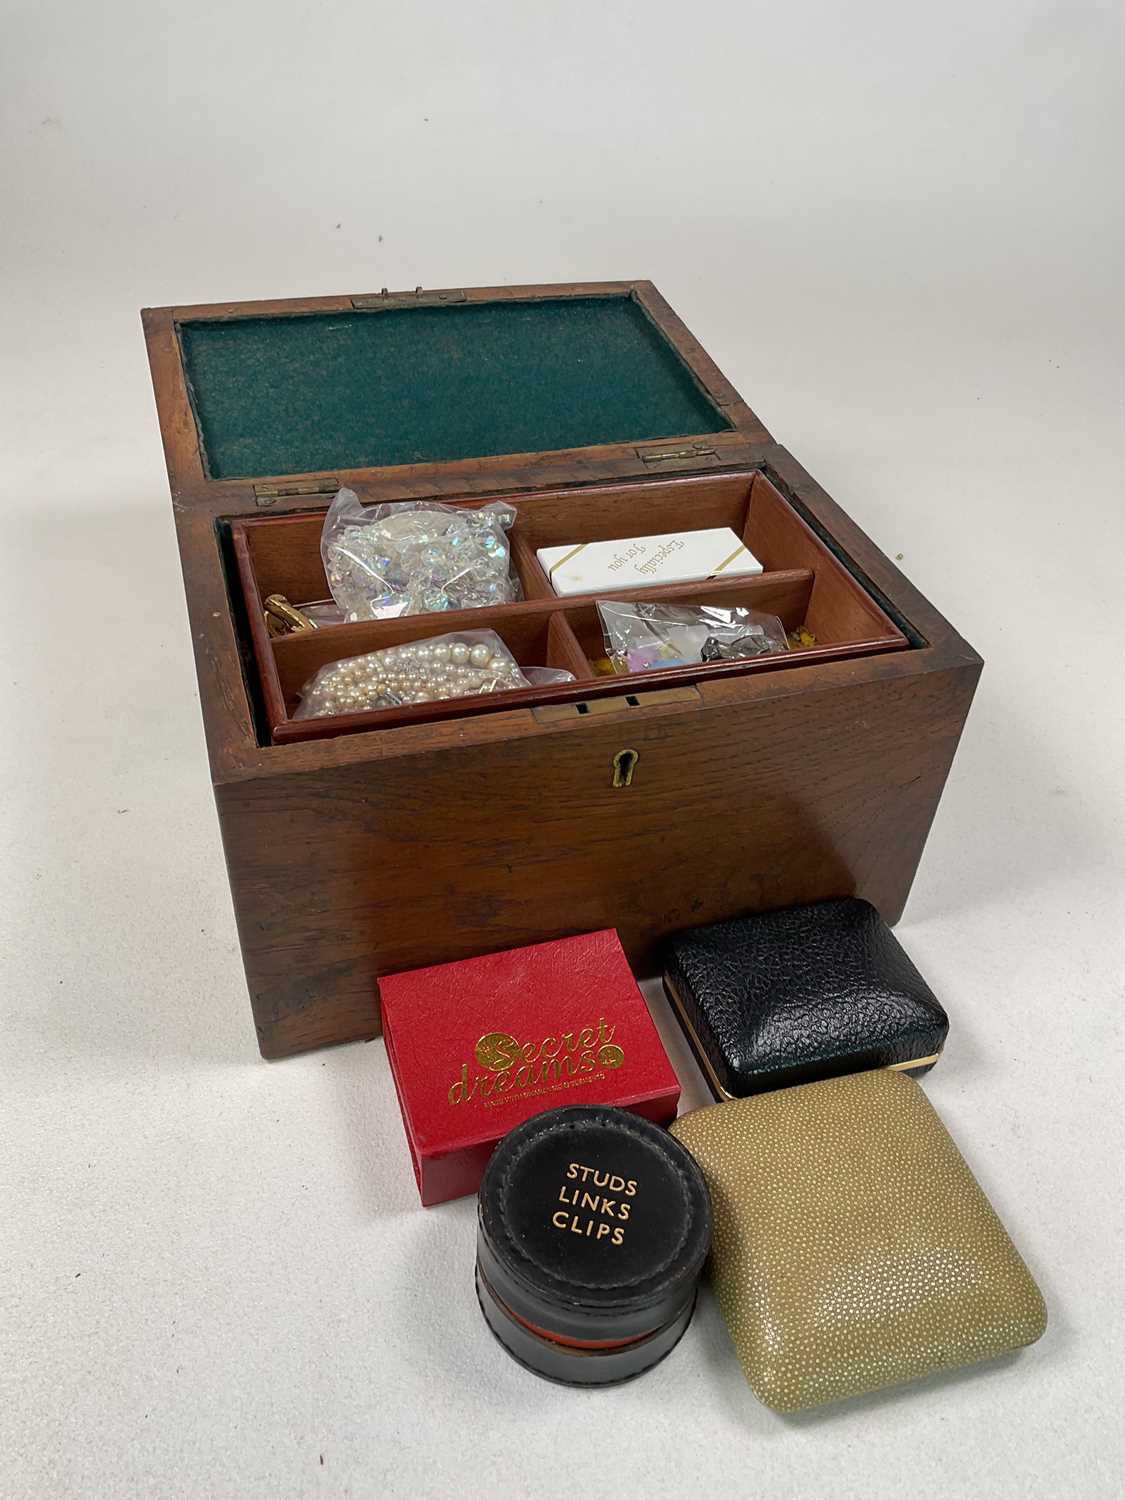 A collection of costume jewellery in a wooden box includes brooches, earrings, watches and others - Image 4 of 4